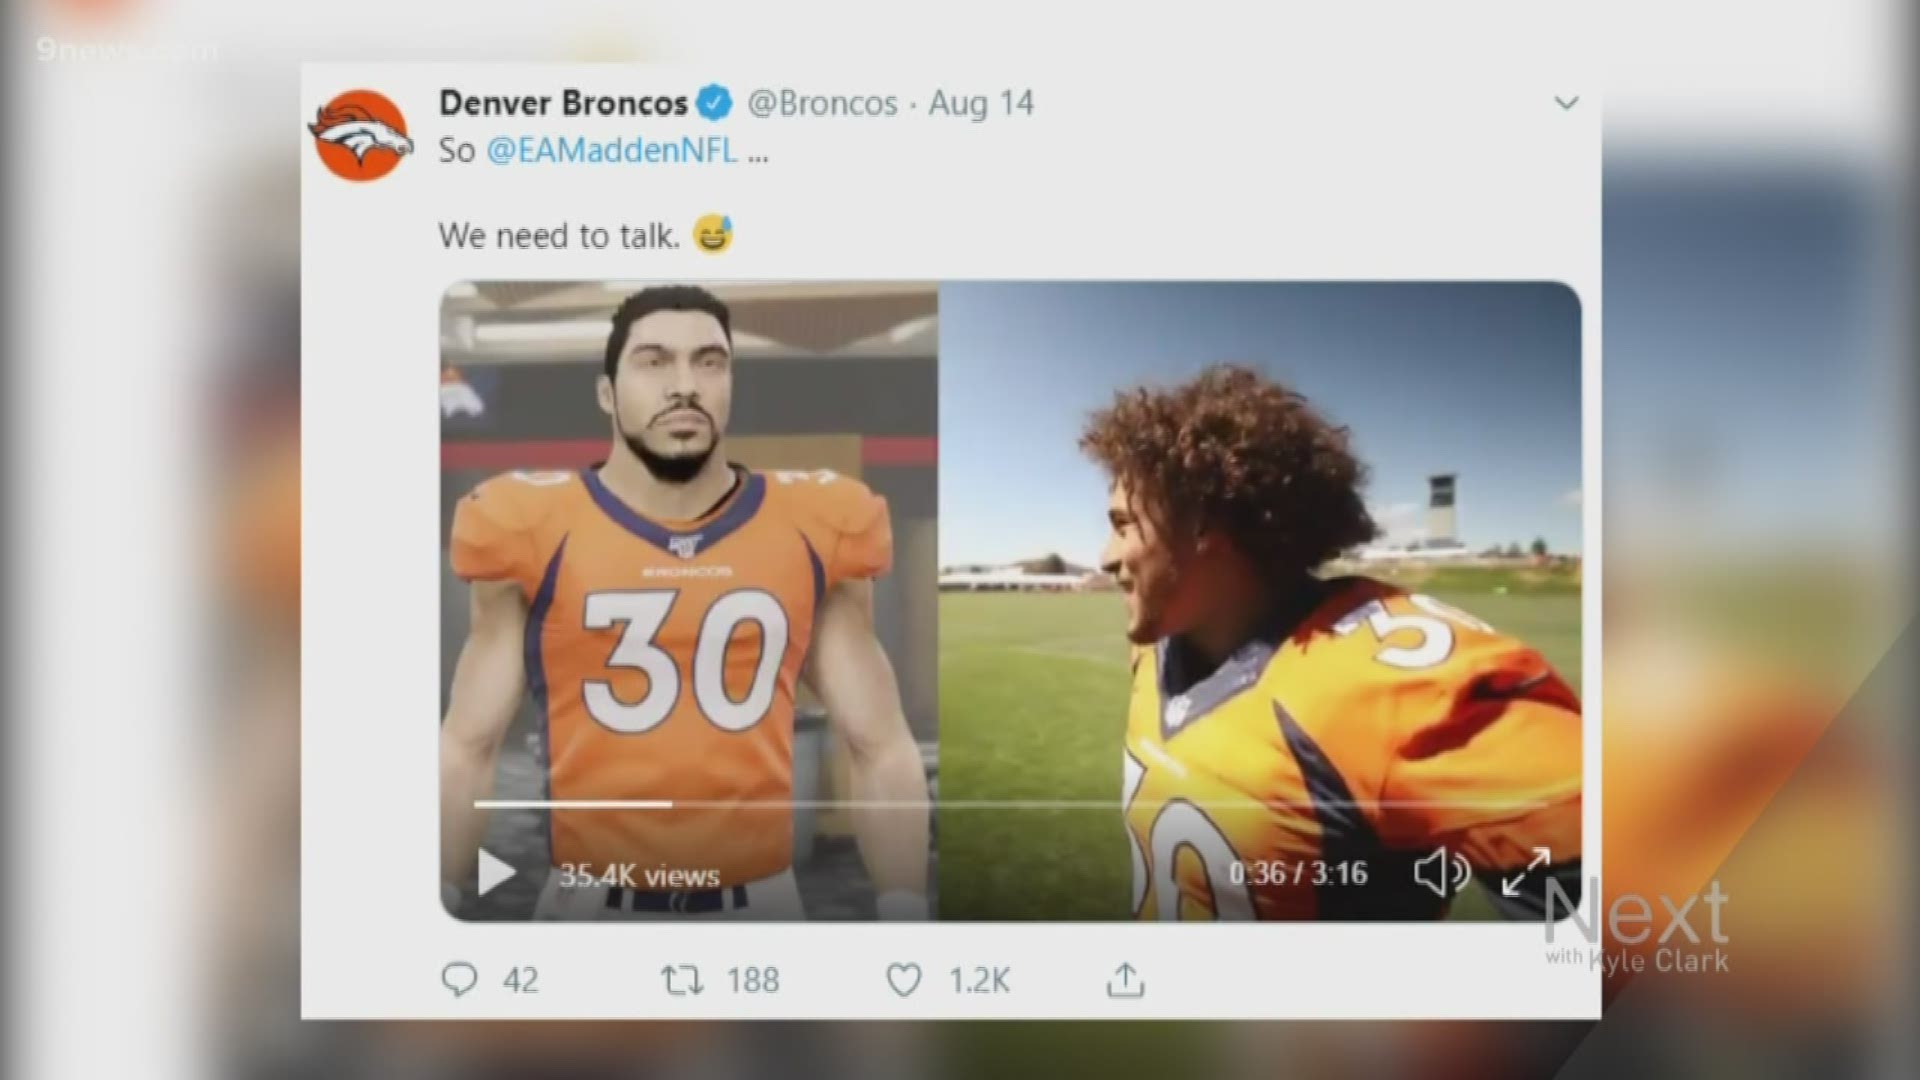 Every year, when the Madden NFL videogame is released, there are usually a good amount of players who are upset with how the game developers rank their abilities. Well, the Denver Broncos have an issue with EA Sports for a whole different reason.